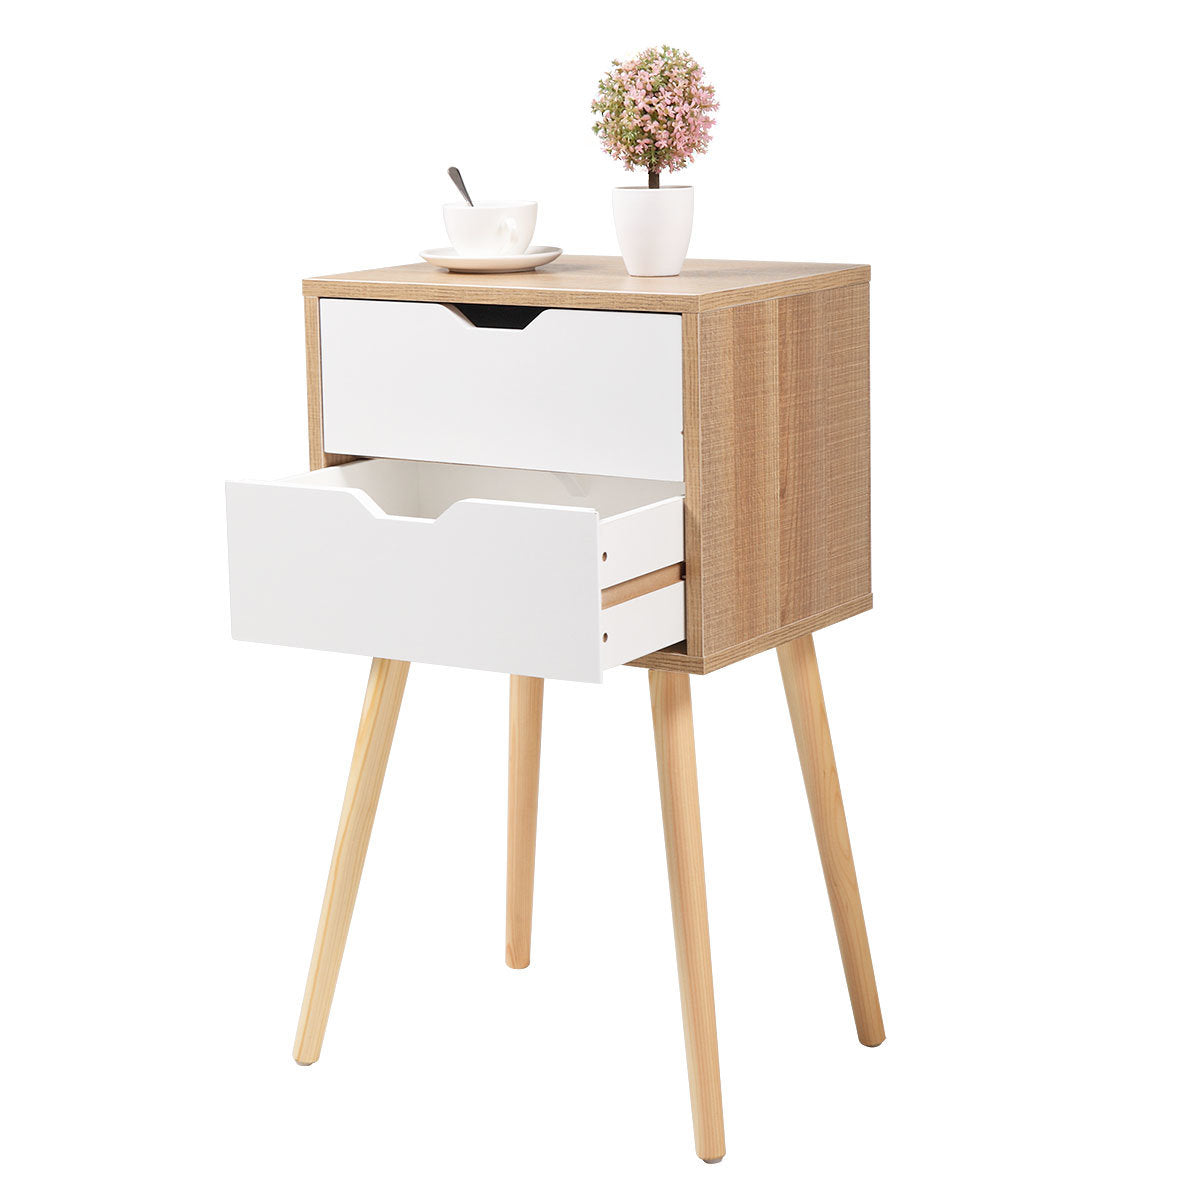 Set of 2 Wooden Modern Nightstand with 2 Drawers